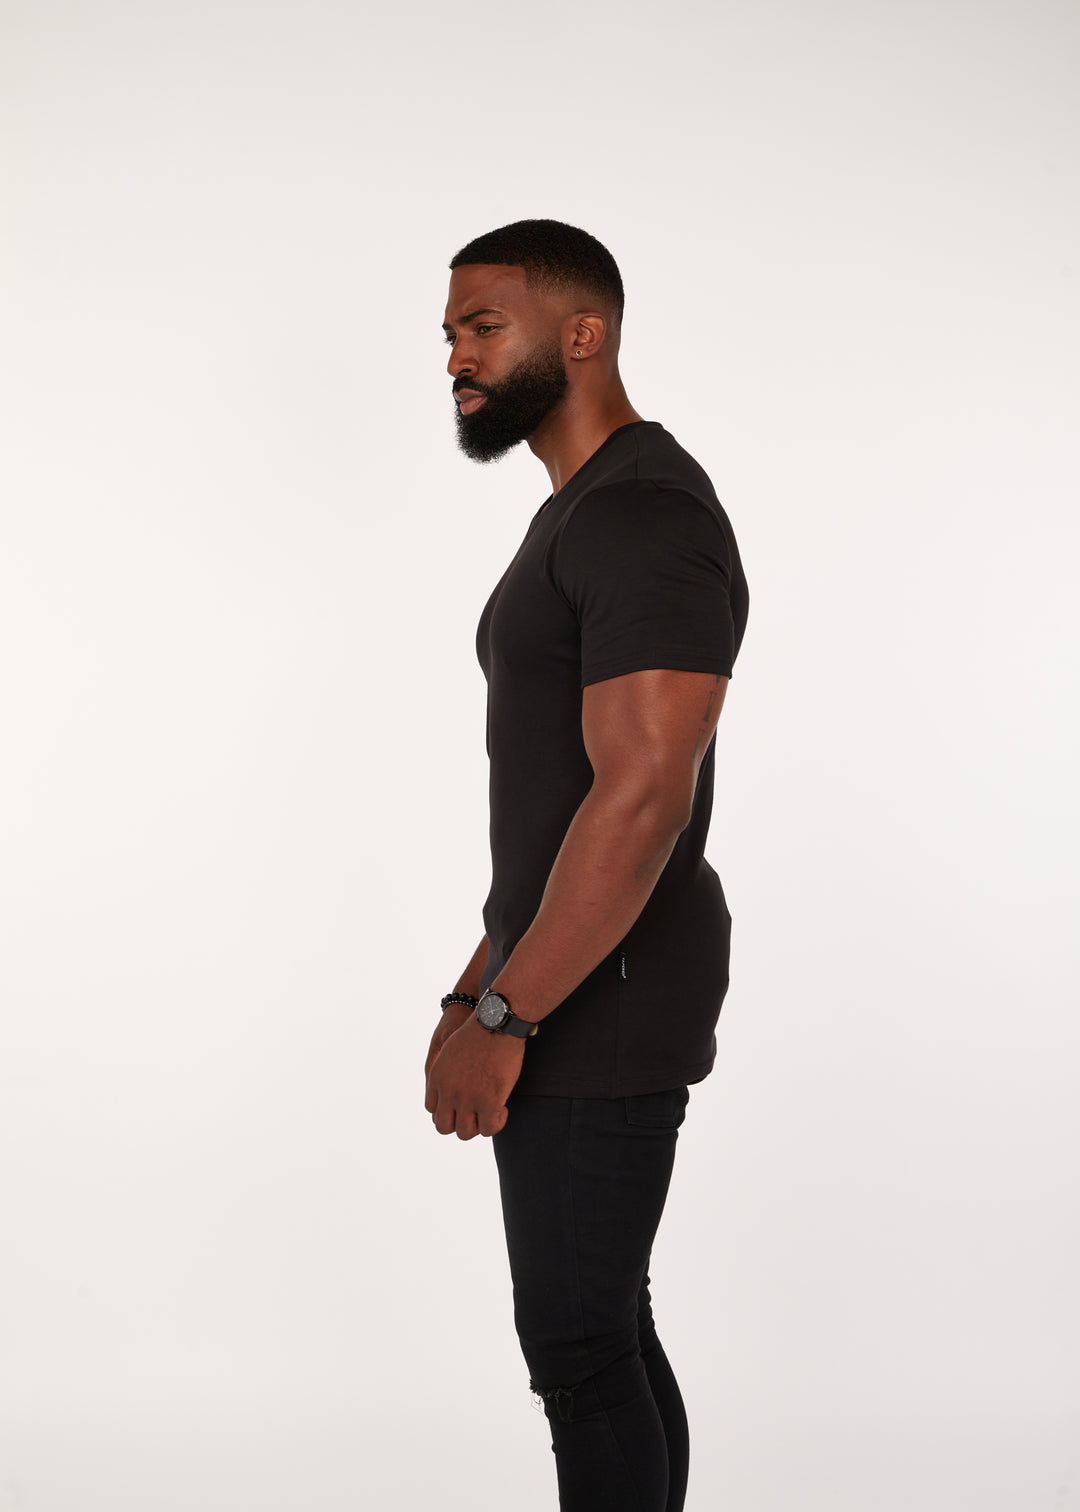 Mens Muscle Fit Black V Neck Tee. A Proportionally Fitted and Muscle Fit V Neck. The best v neck t-shirt for muscular guys.